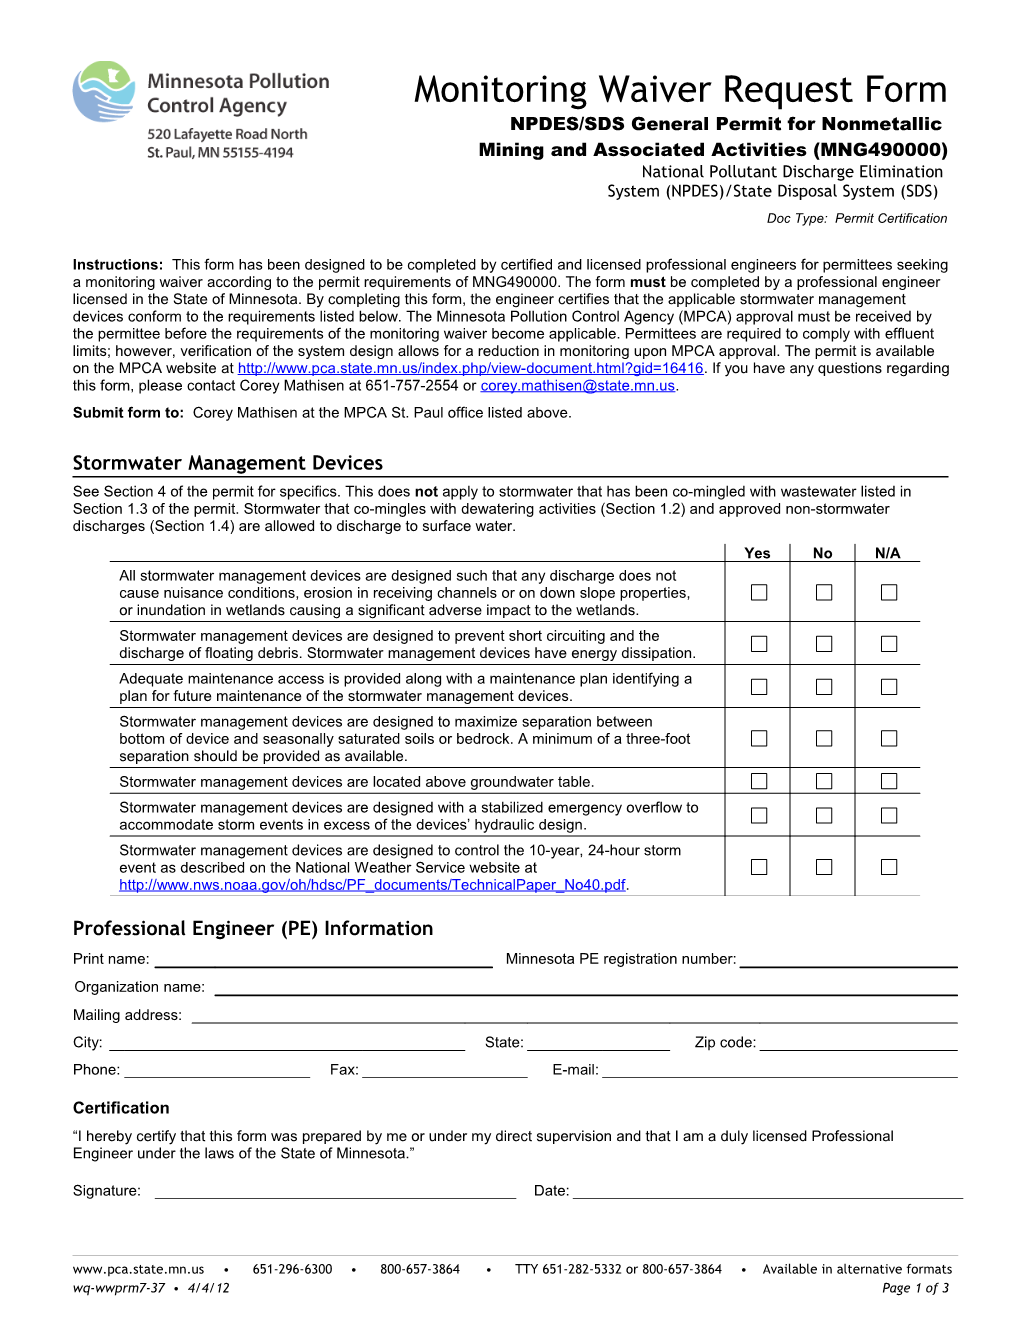 Monitoring Waiver Request Form - Form